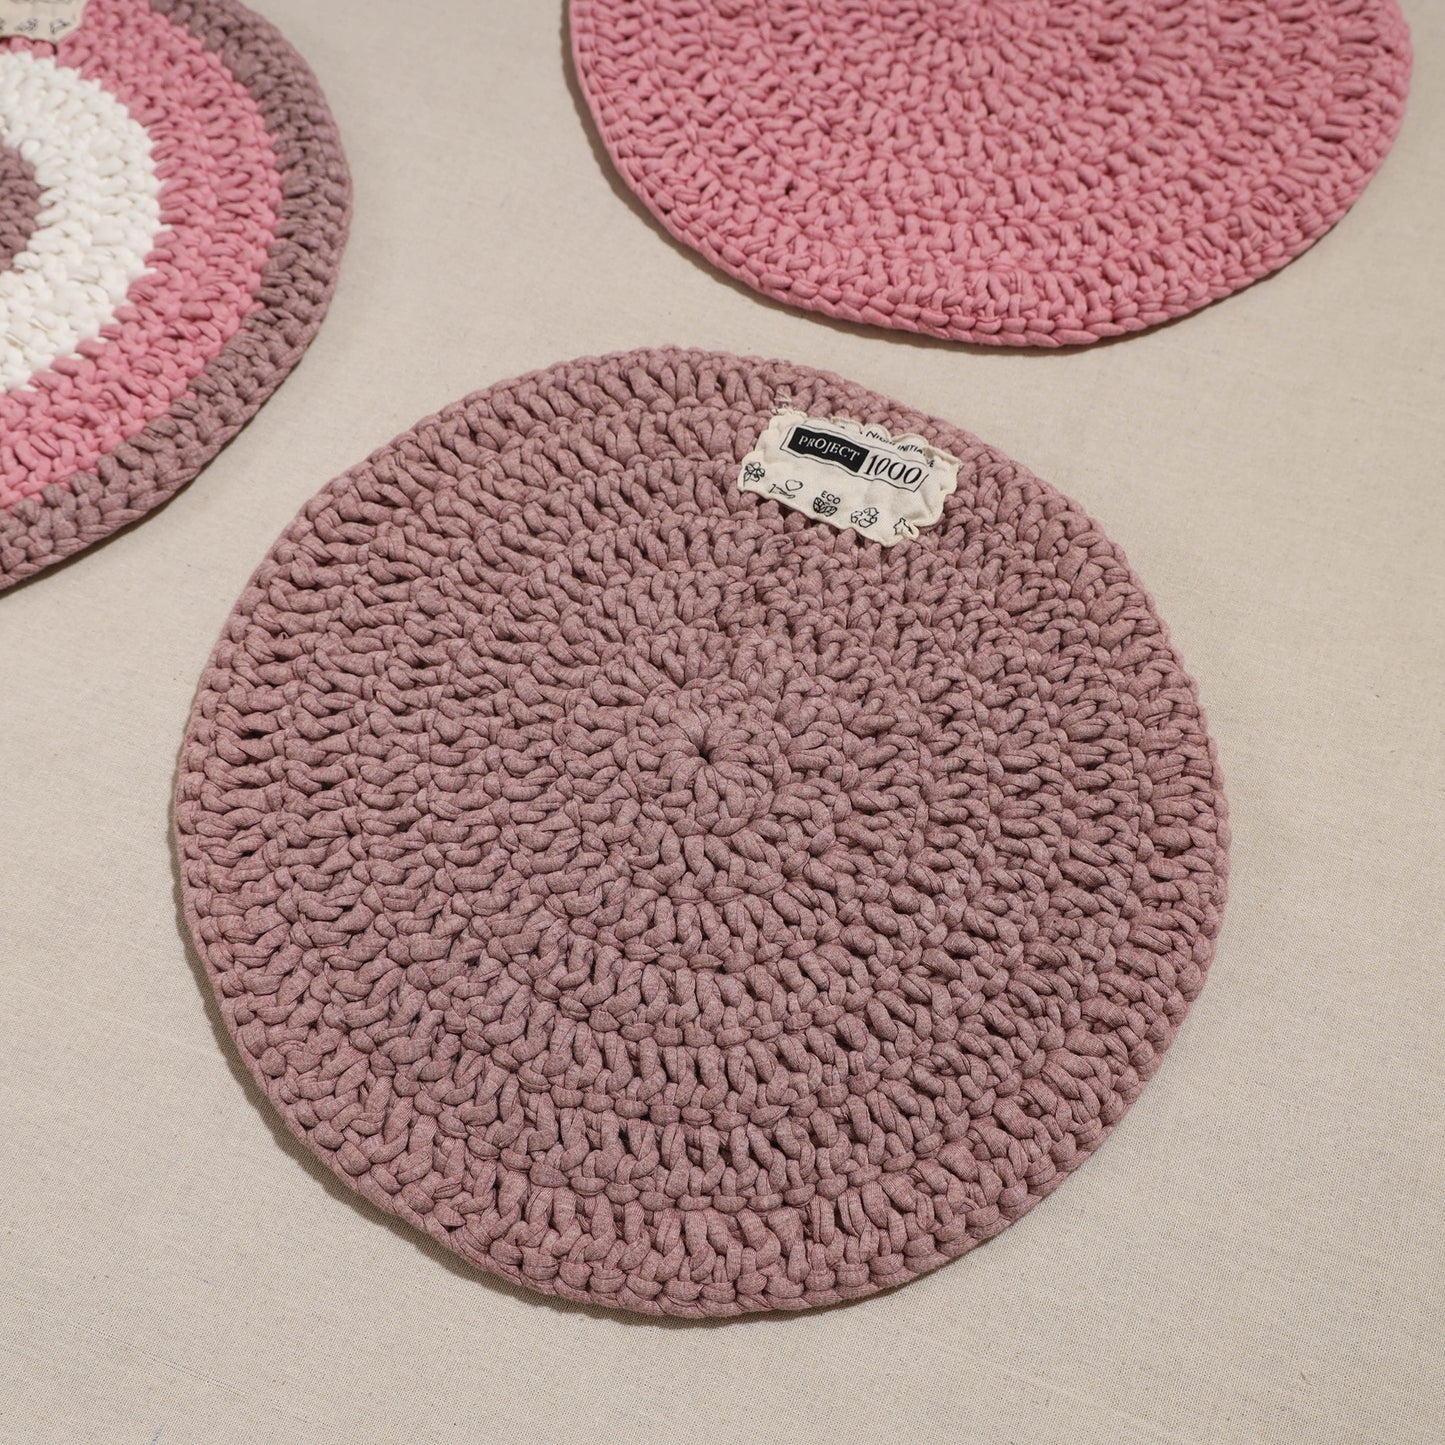 Crochet Work Upcycled Cotton Round Placemat (Set of 4)